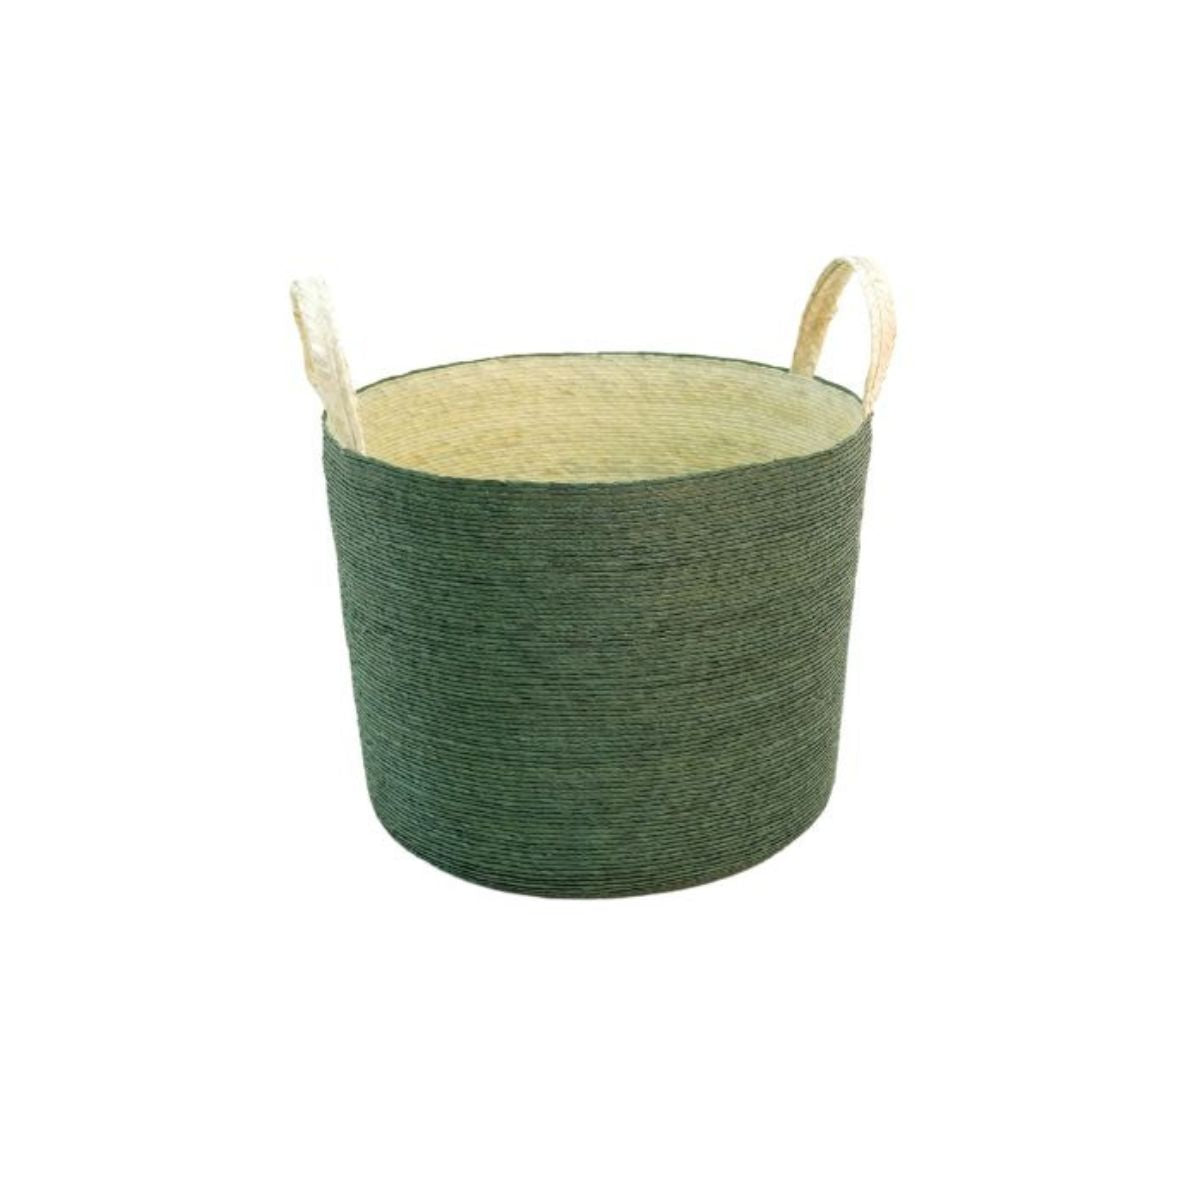 Handmade Round Basket with Handles in Cactus Green